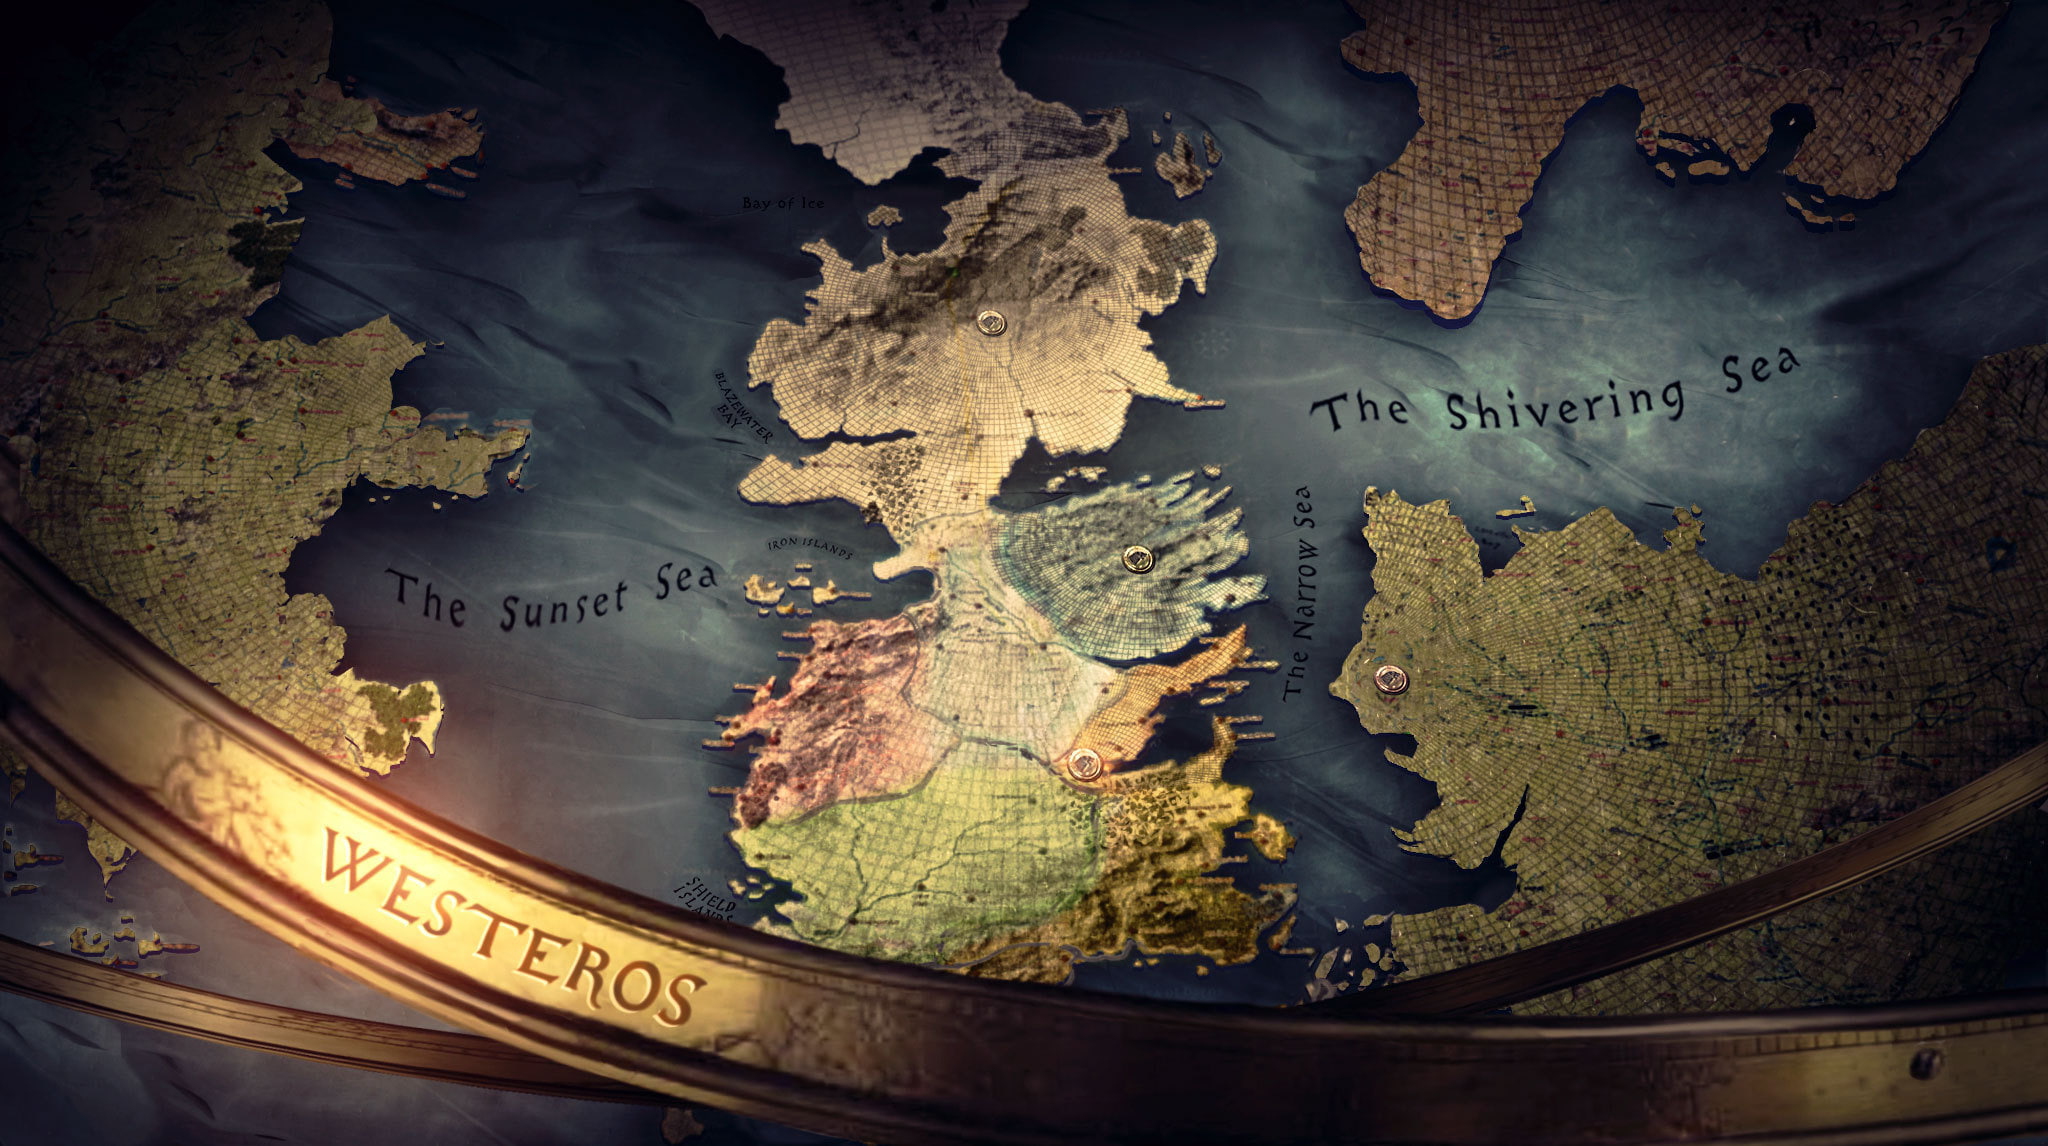 Fantasy, Game of Thrones, Song of Ice and Fire, Westeros, Map